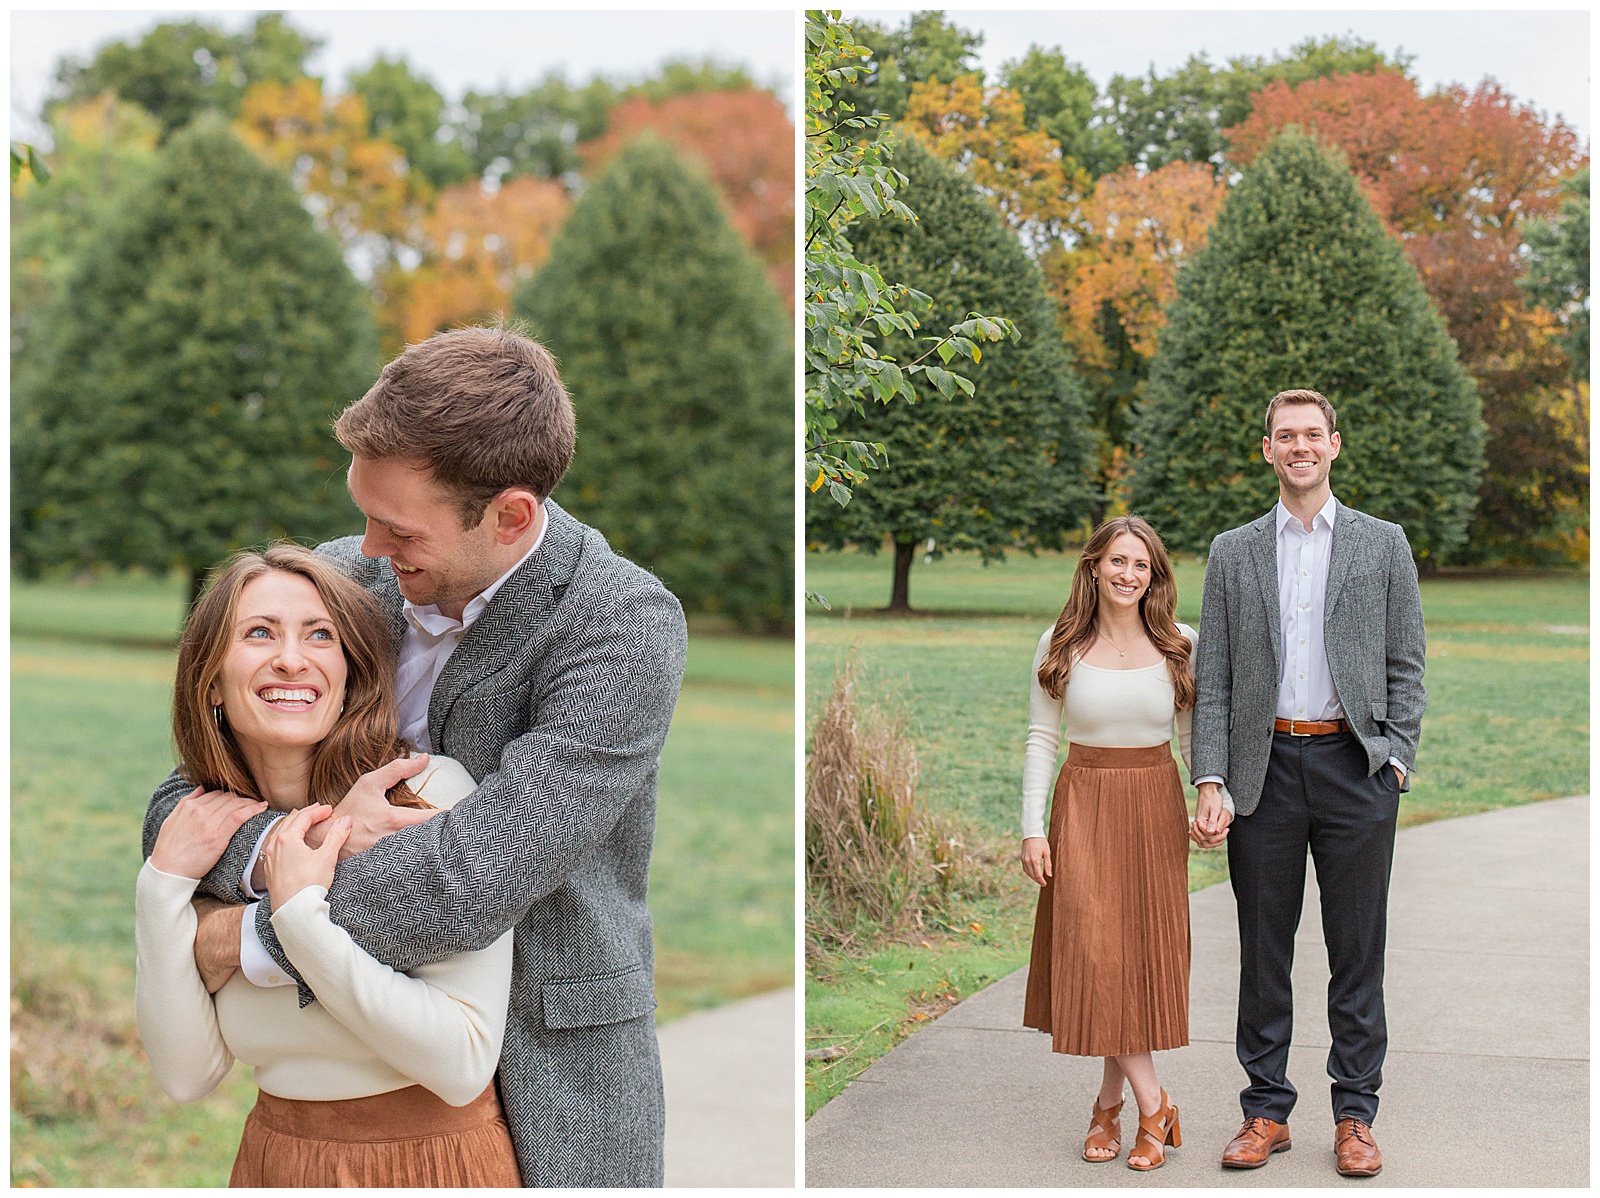 Holliday Park Fall Engagement Session | Monica Brown Photography | monicabrownphoto.com